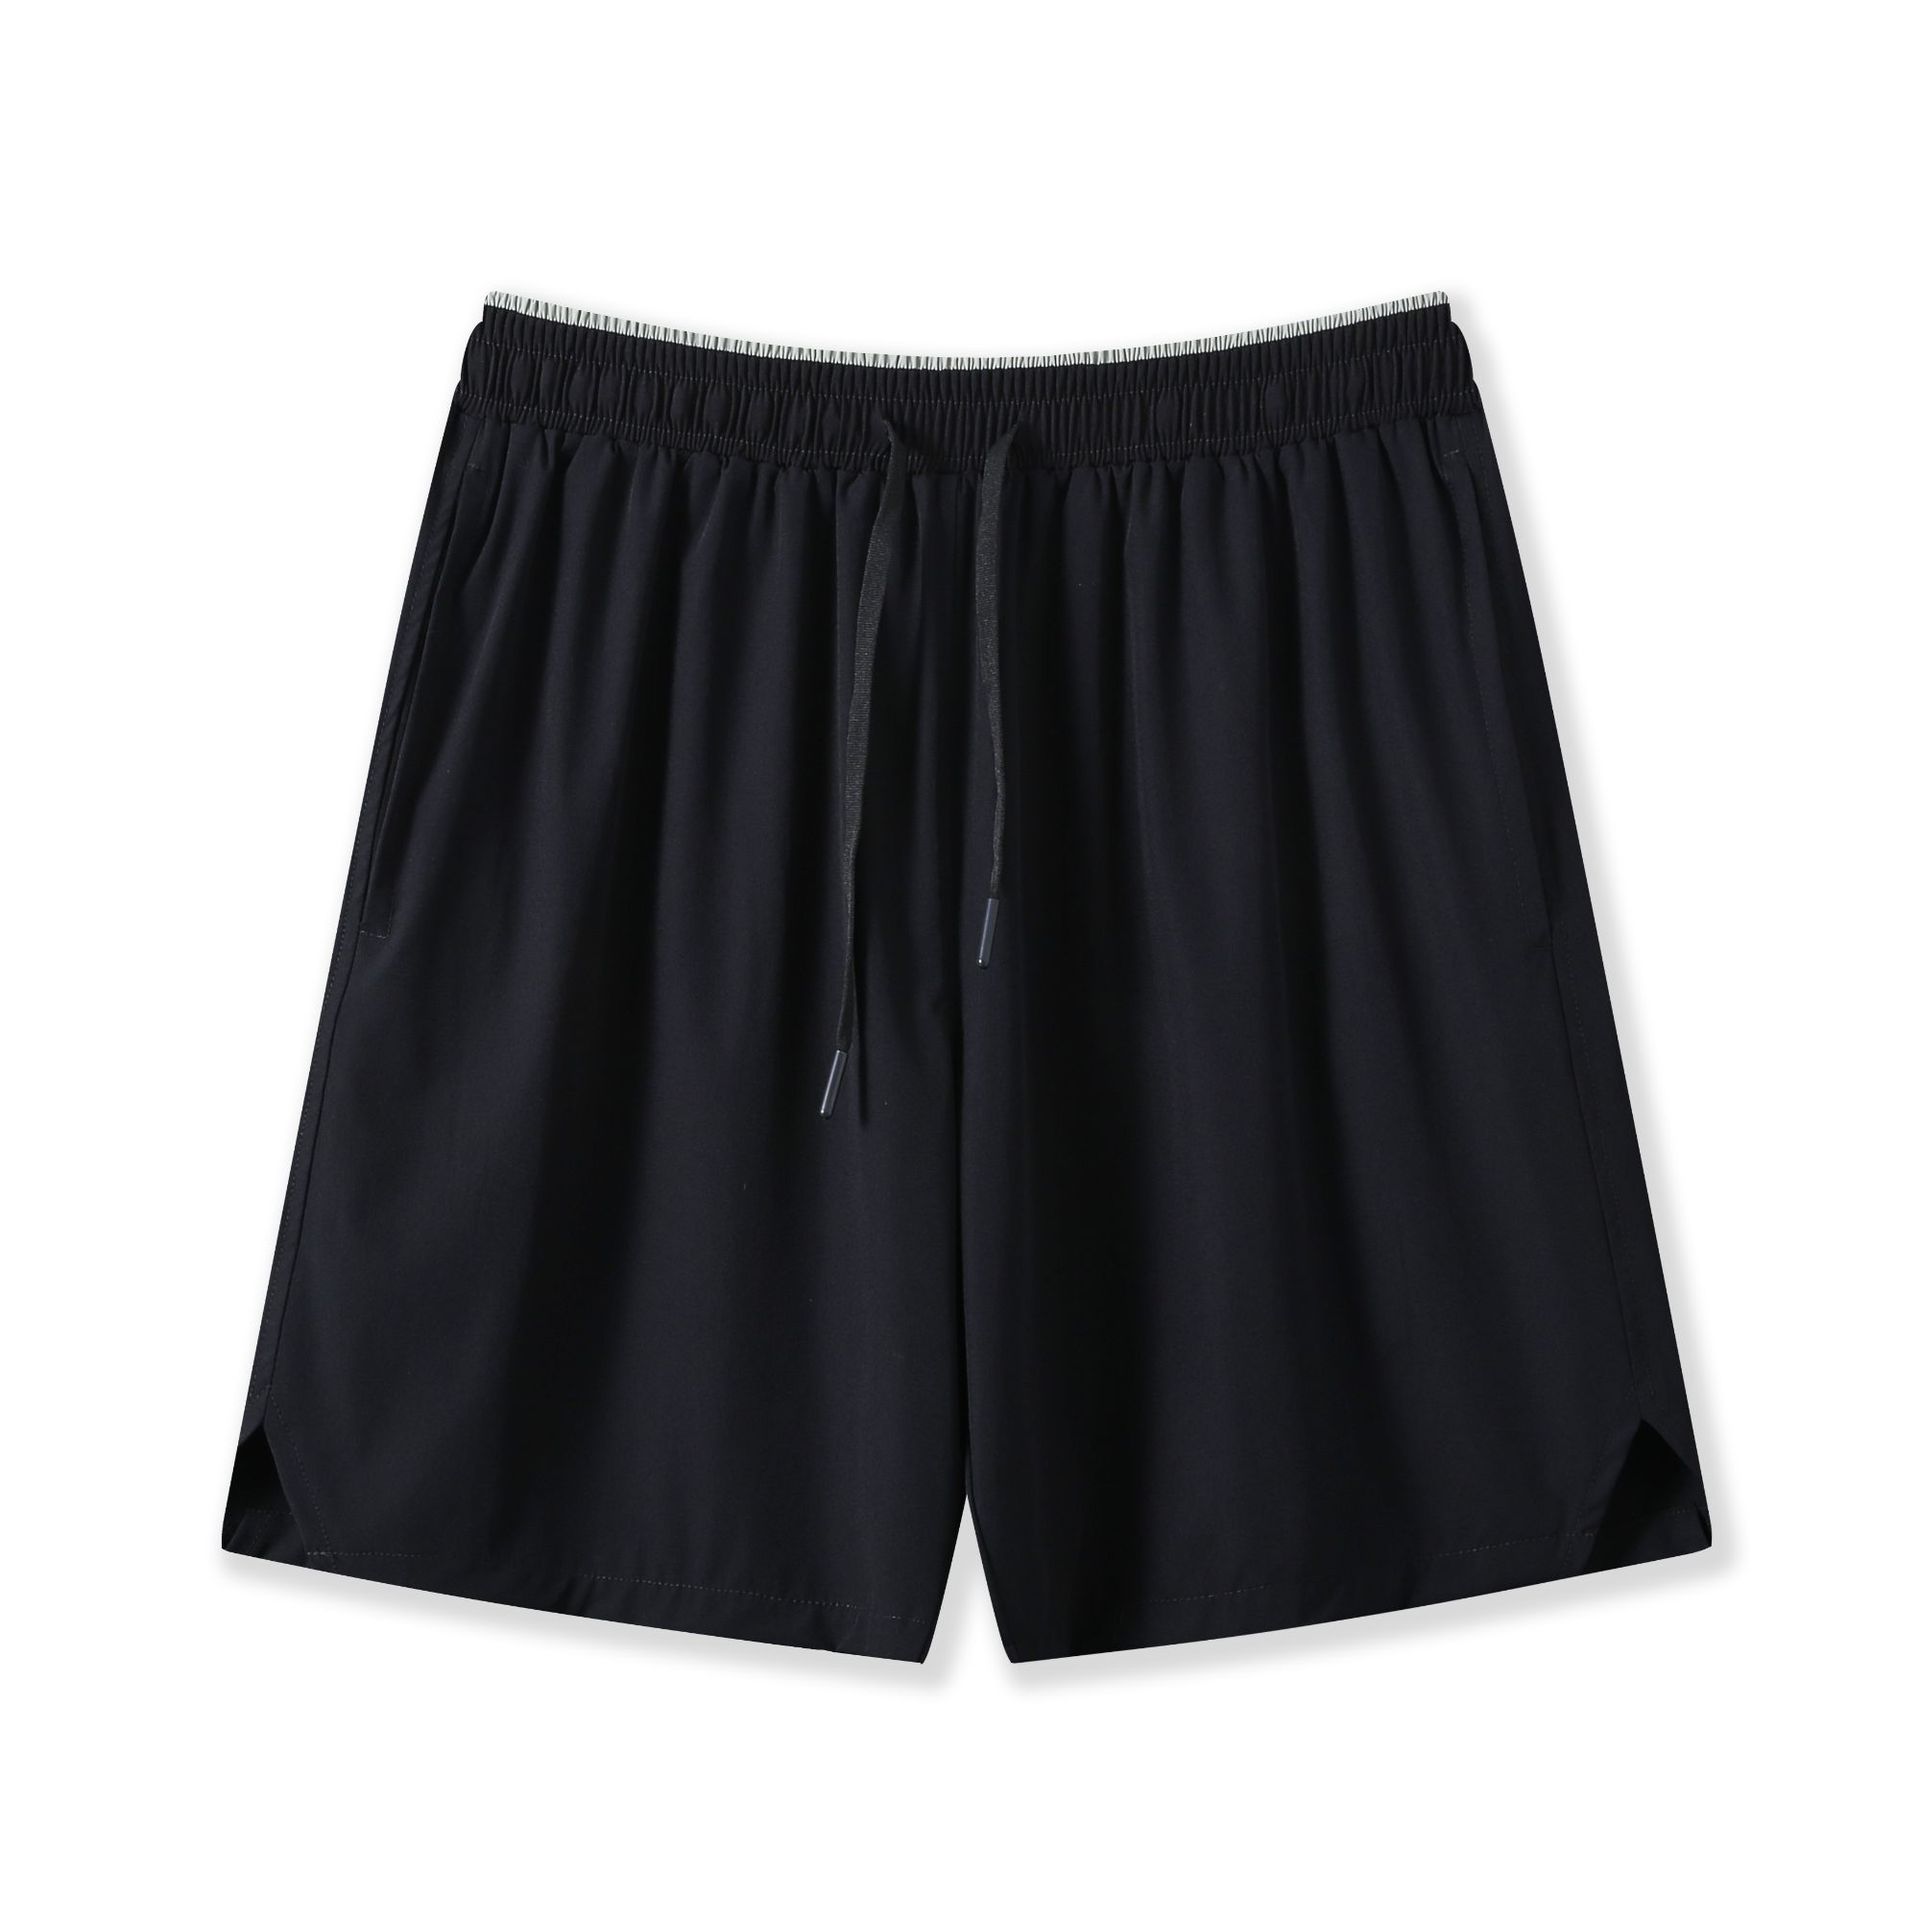 Men's Breathable Casual Athletic Shorts, Perfect for Training and Fitn